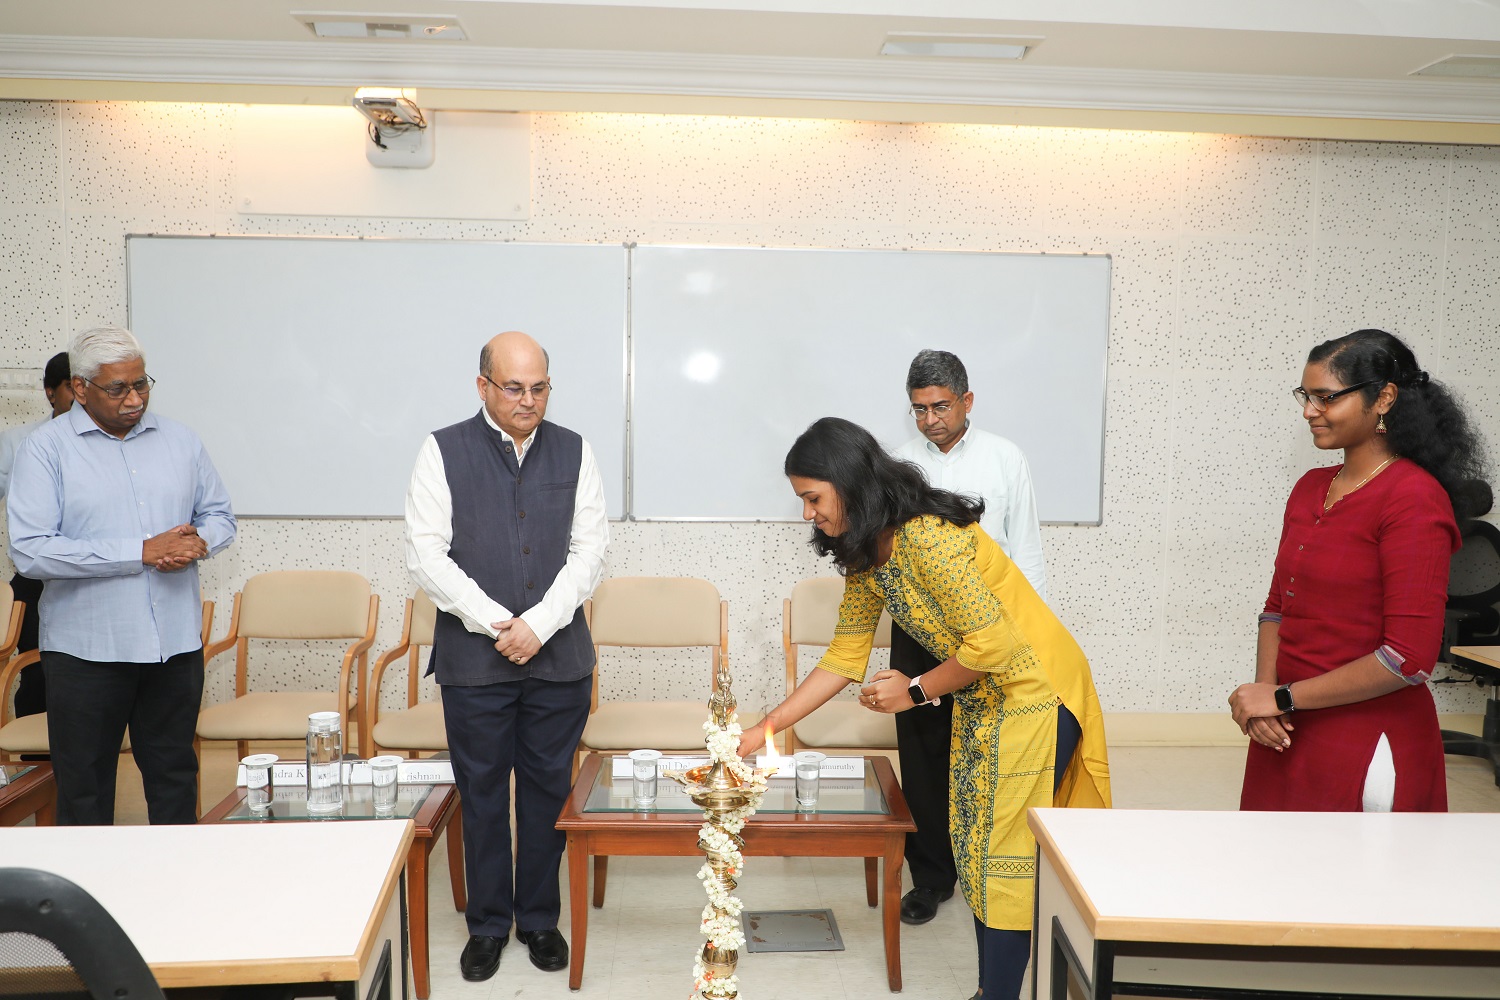 A student lights the ceremonial lamp at the inauguration of the new batch of the Doctoral Programme (PhD) of the institute, on 12th June 2023. Prof. Rajendra K Bandi, Dean, Administration and faculty in the Information Systems area, Prof. Rishikesha T Krishnan, Director, IIM Bangalore and Prof. Ananth Krishnamurthy, Chairperson, PhD programme and faculty in the Decision Sciences area, look on.